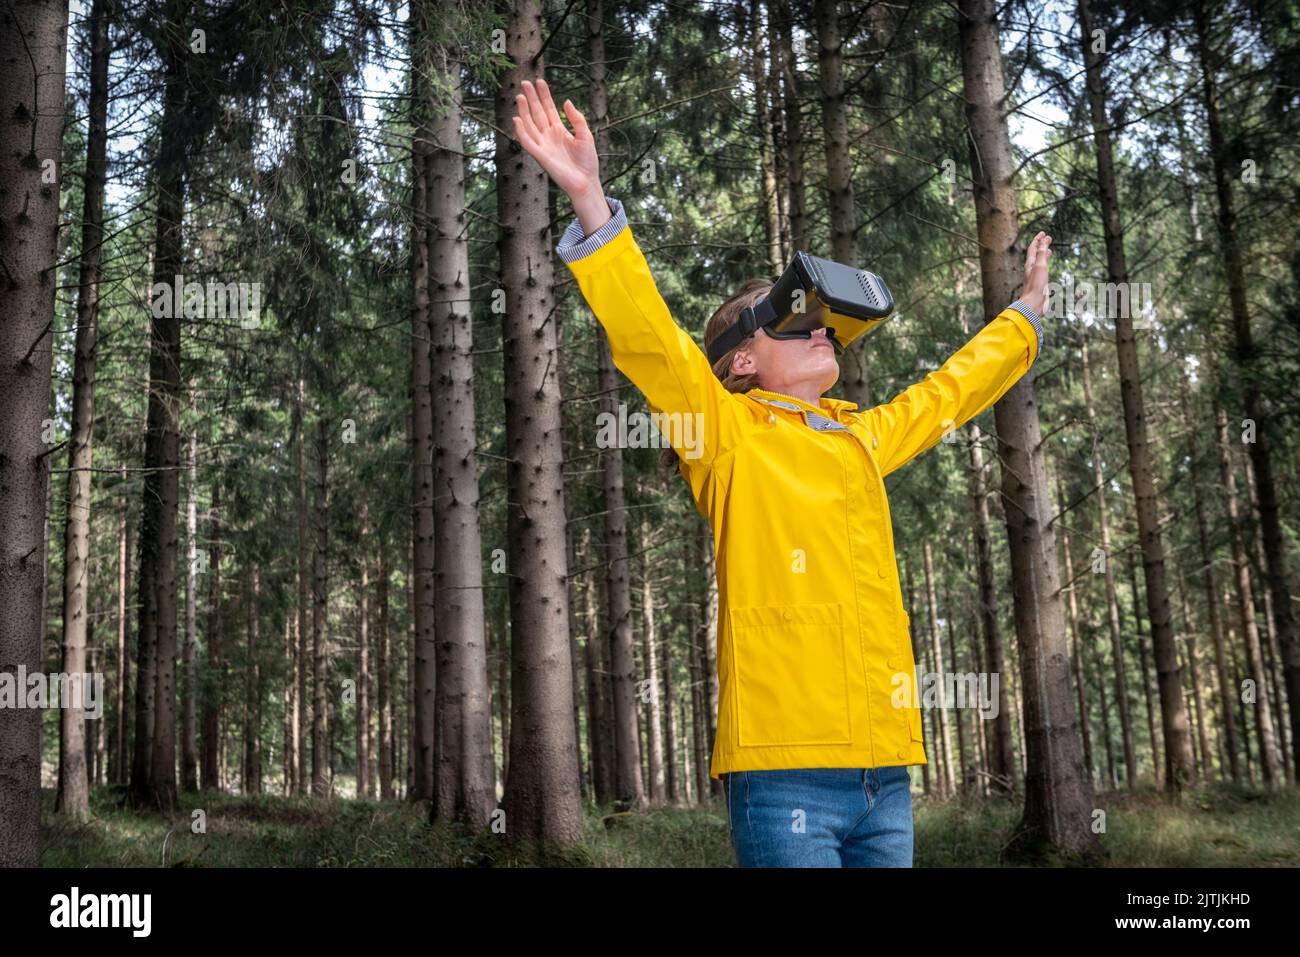 Woman wearing virtual reality headset standing in a forest Stock Photo